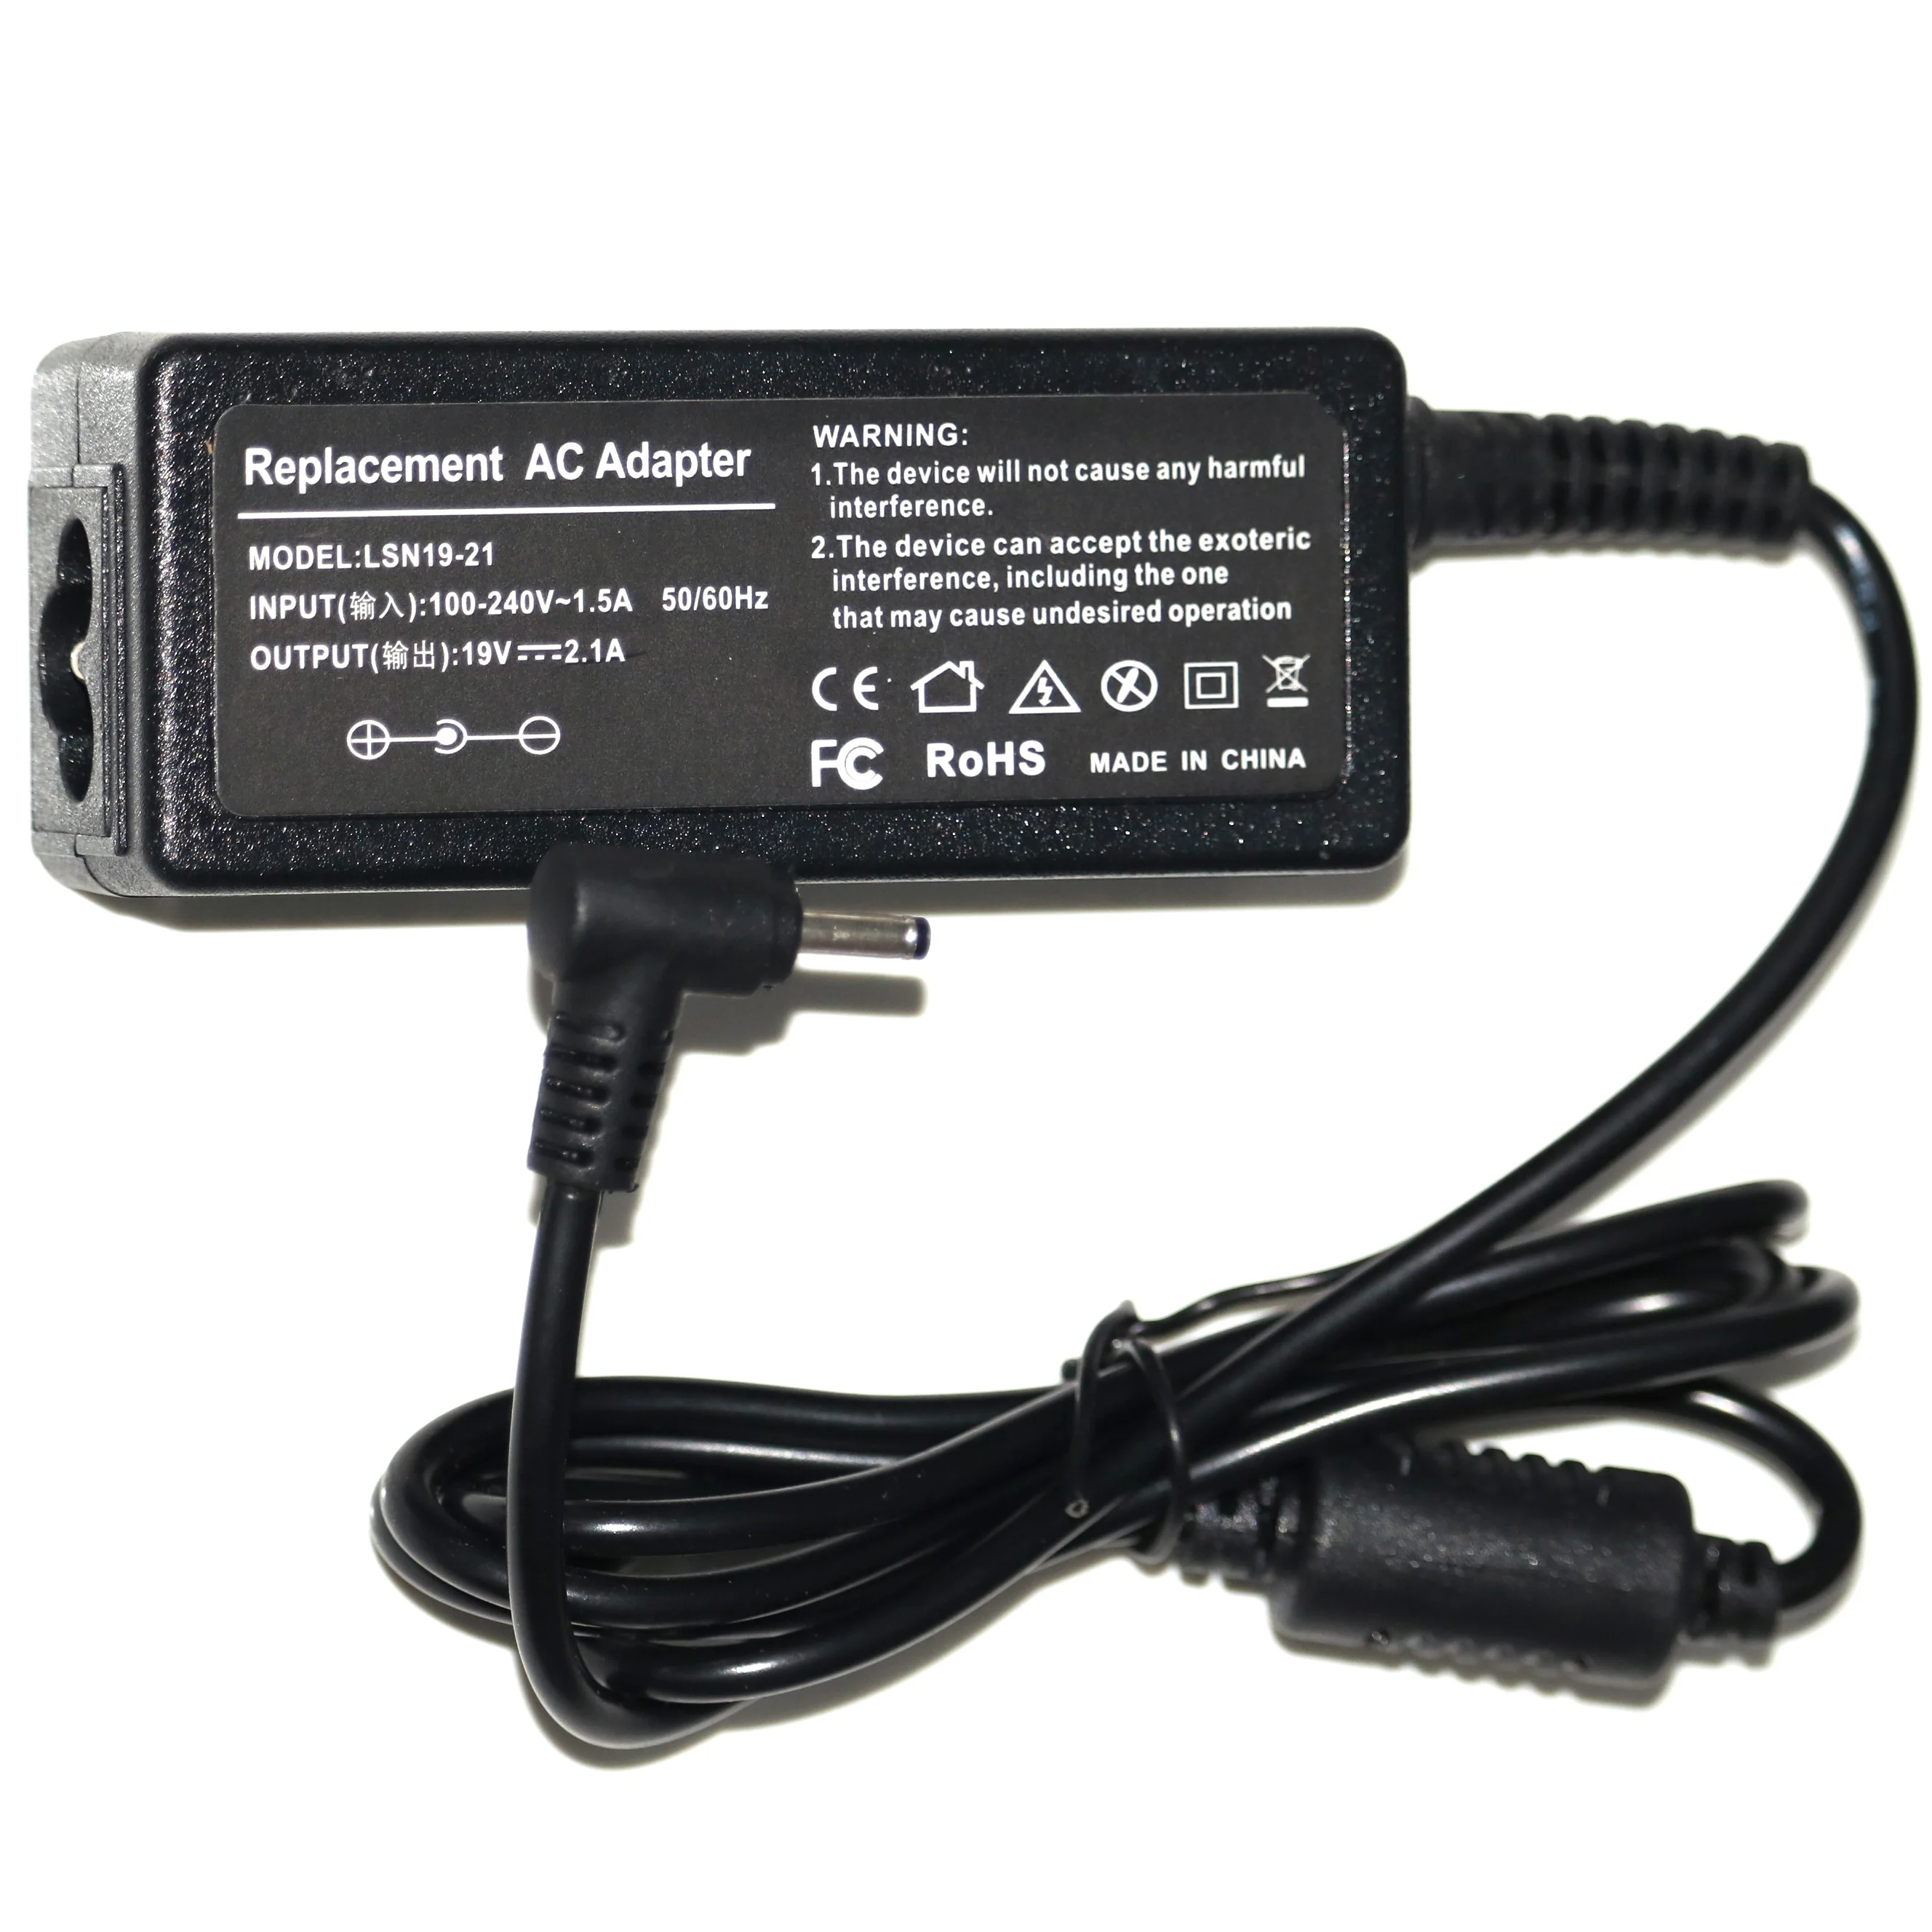 

19V 2.1A 40W AC Adapter Charger Power Supply For SAMSUNG Ultrabook NP530U3C NP535U3C NP540U3C POWER SUPPLY CHARGER 3.0*1.1MM